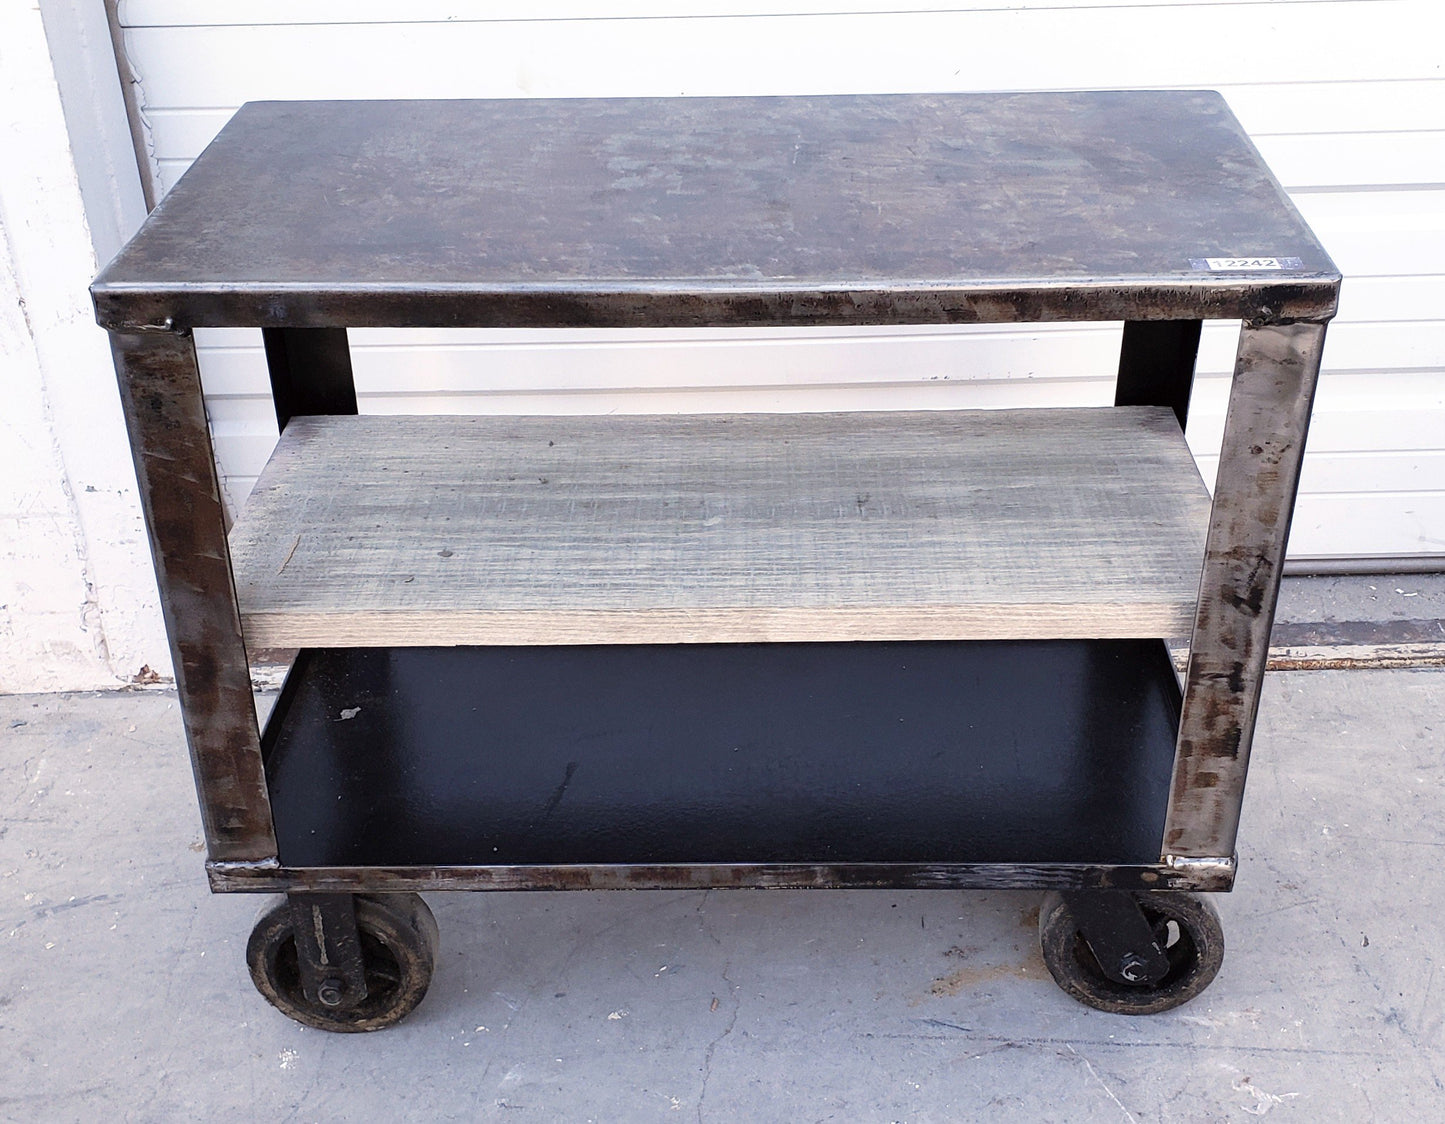 Stripped Trolley Table